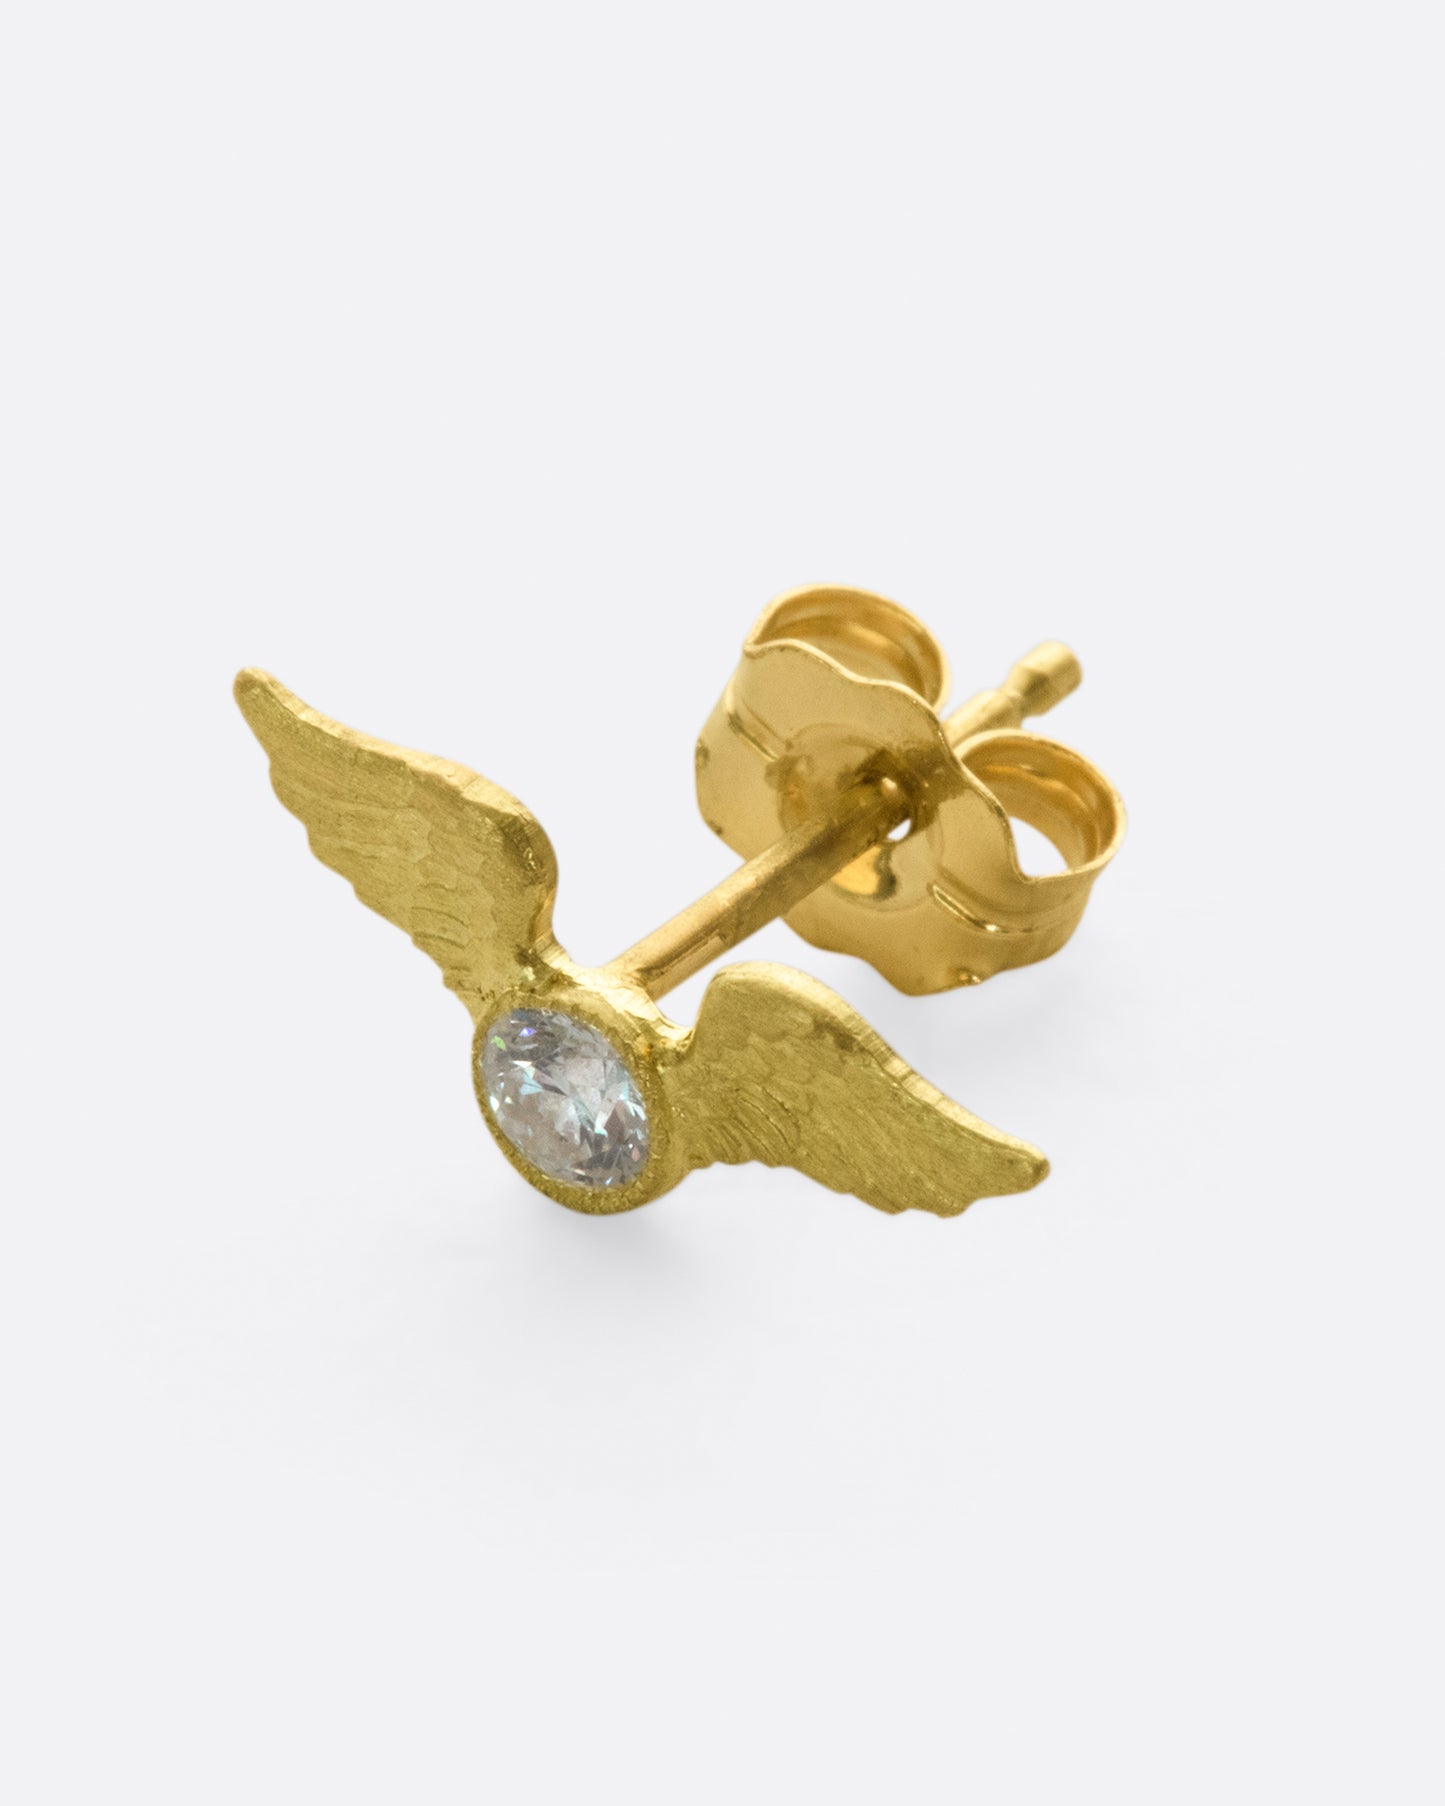 This little stud is inspired by the winged mountings and pavé wing pieces of late Victorian jewelry.